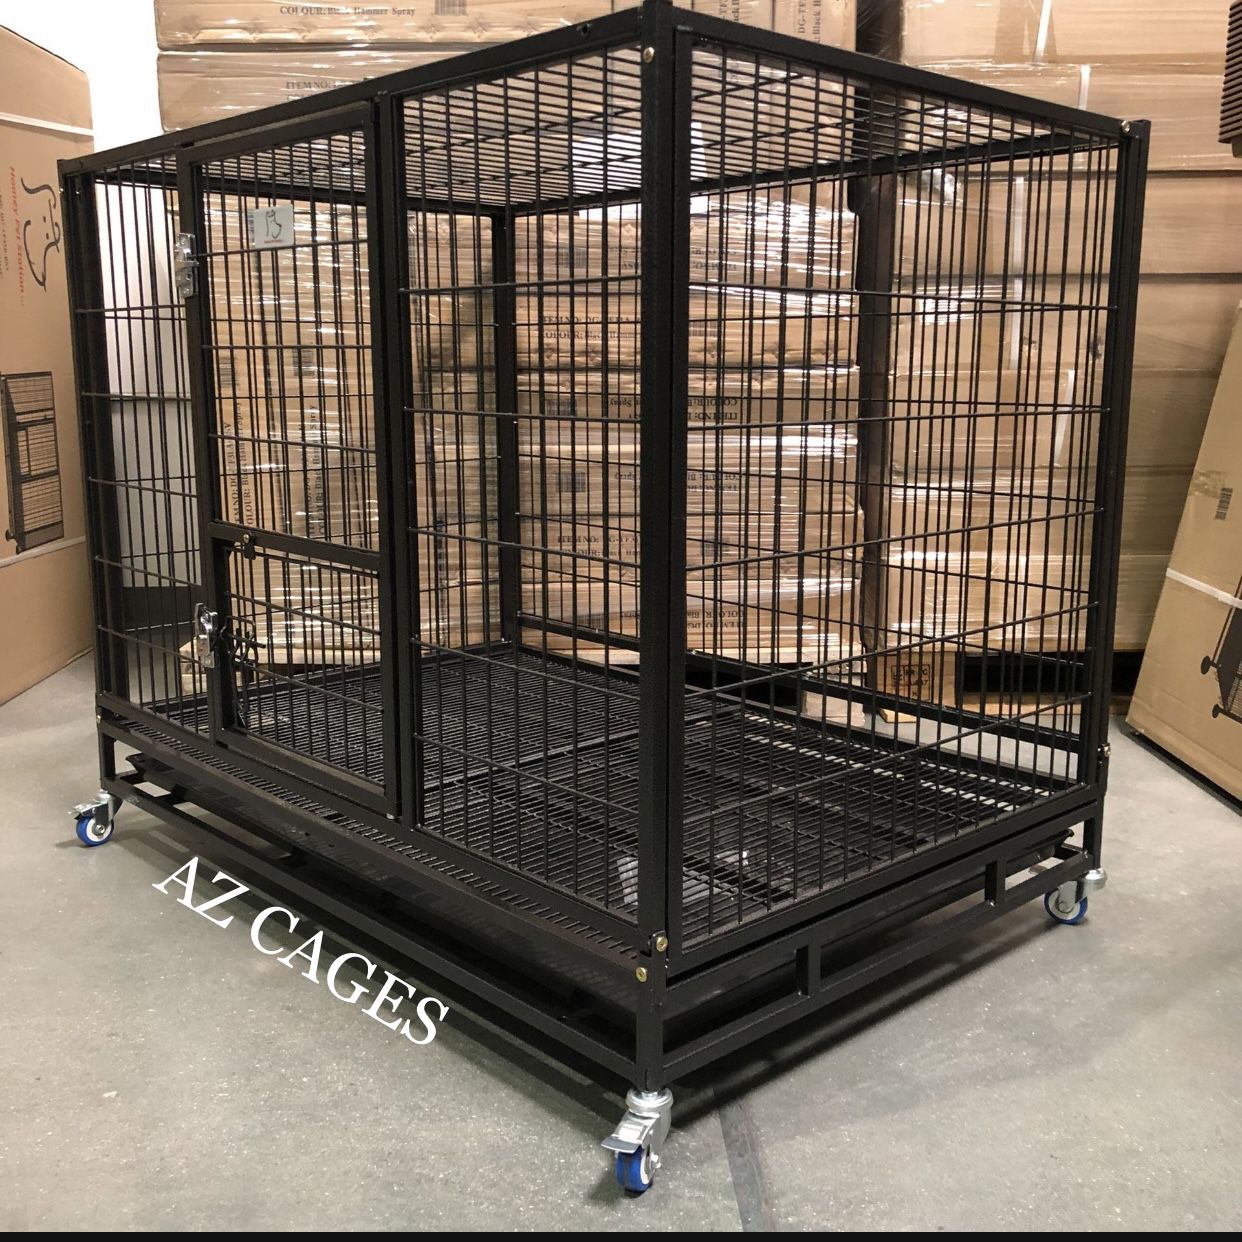 XL 43HD Dog Kennel Brand New In Box Or Put Together $20 Extra🐕🇺🇸 Truck Required For Pick Up💁